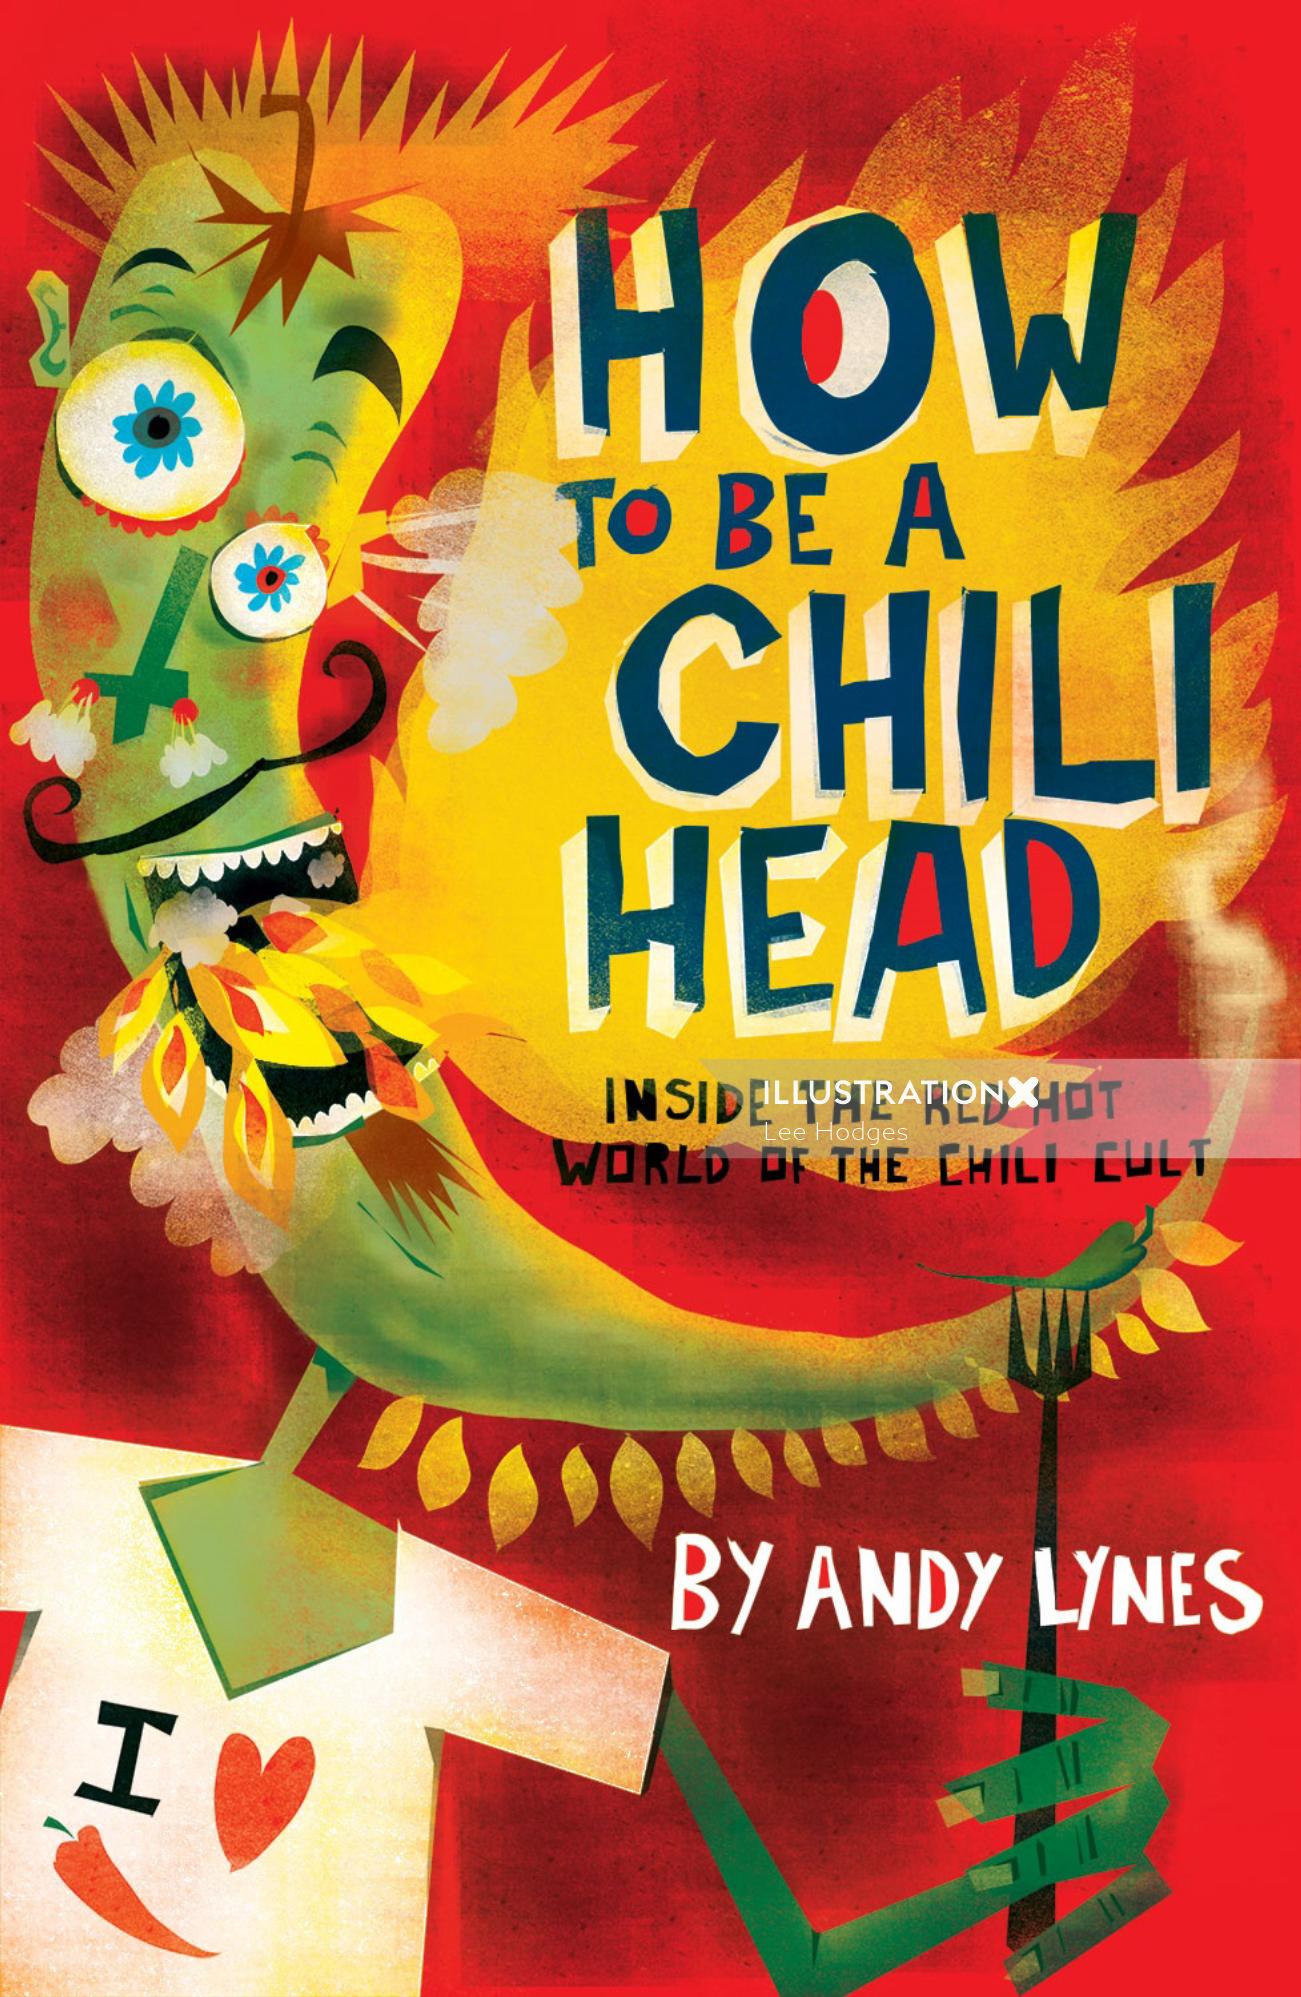 Couverture du livre How to Be a Chili Head